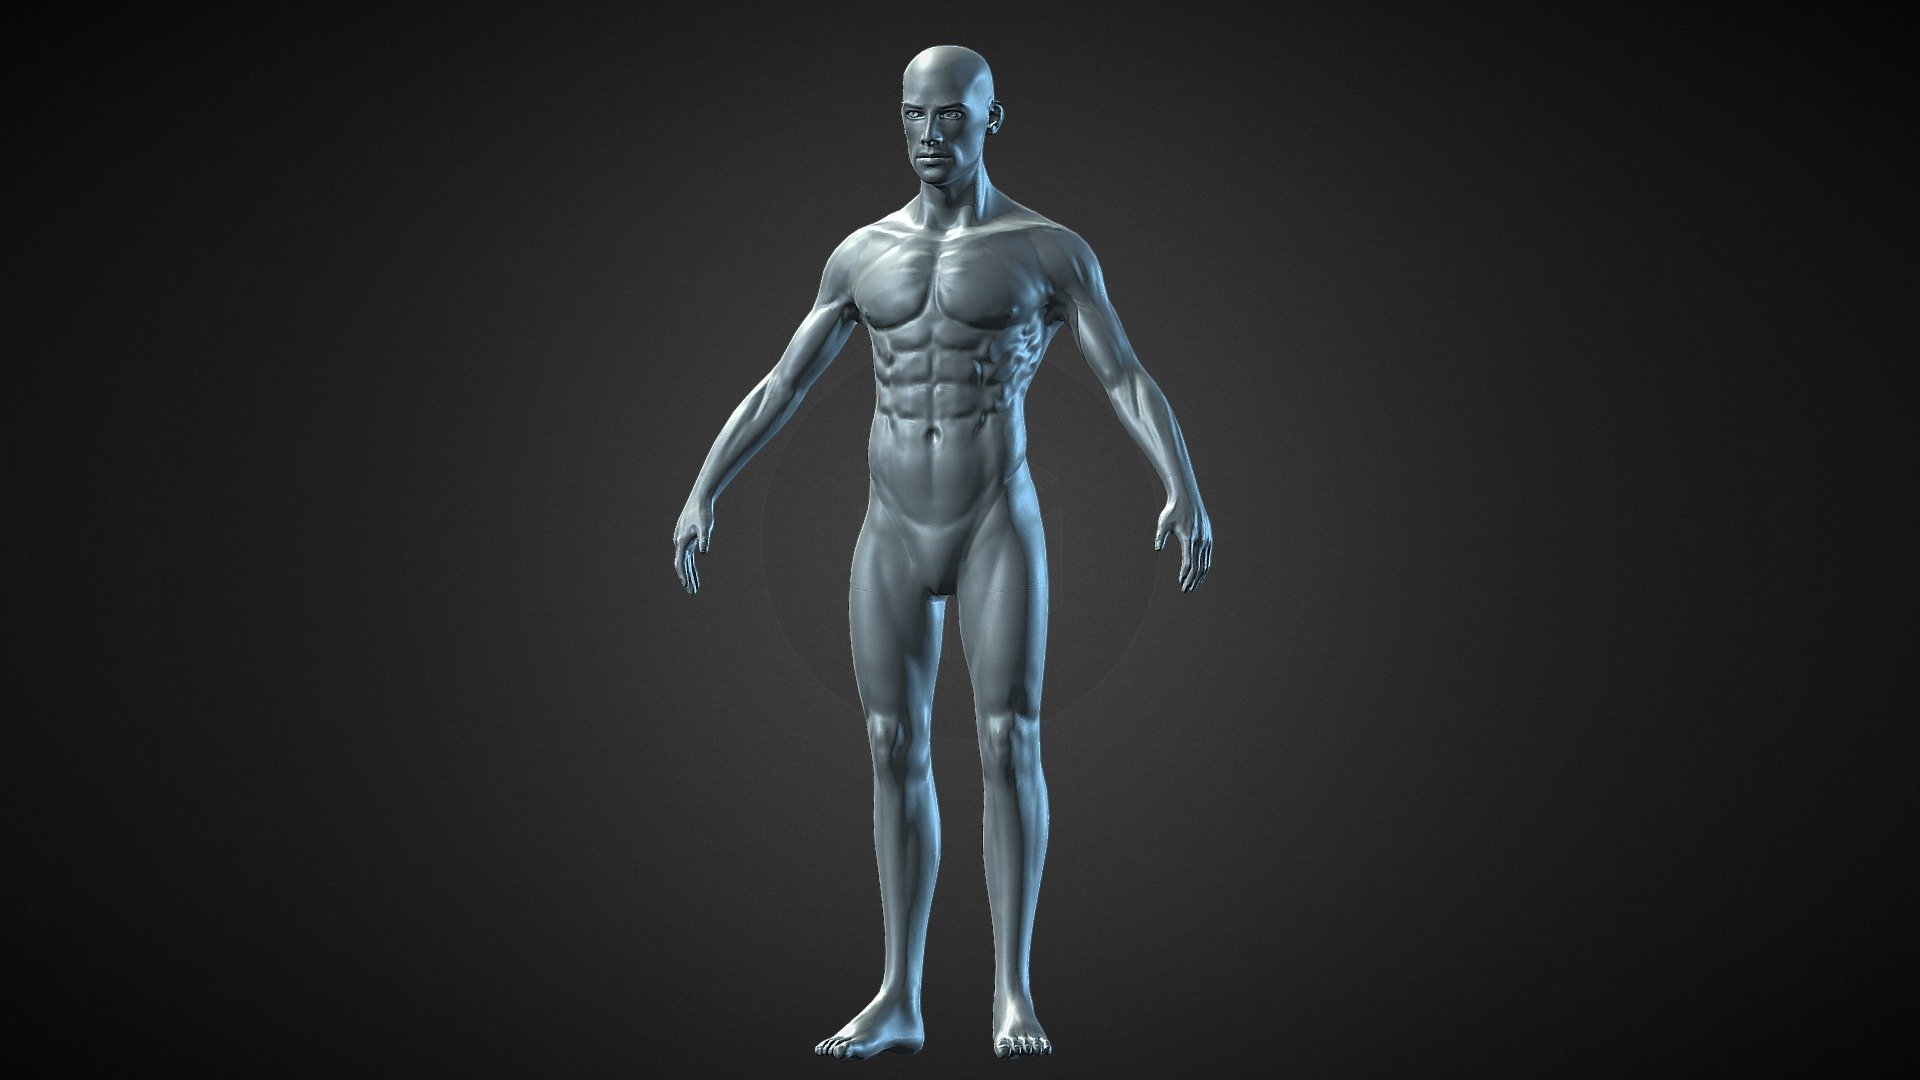 Here is a low poly model for a male character who is rather ripped. Enjoy! - Male base mesh with muscle detail - Download Free 3D model by C.J..Goldman 3d model